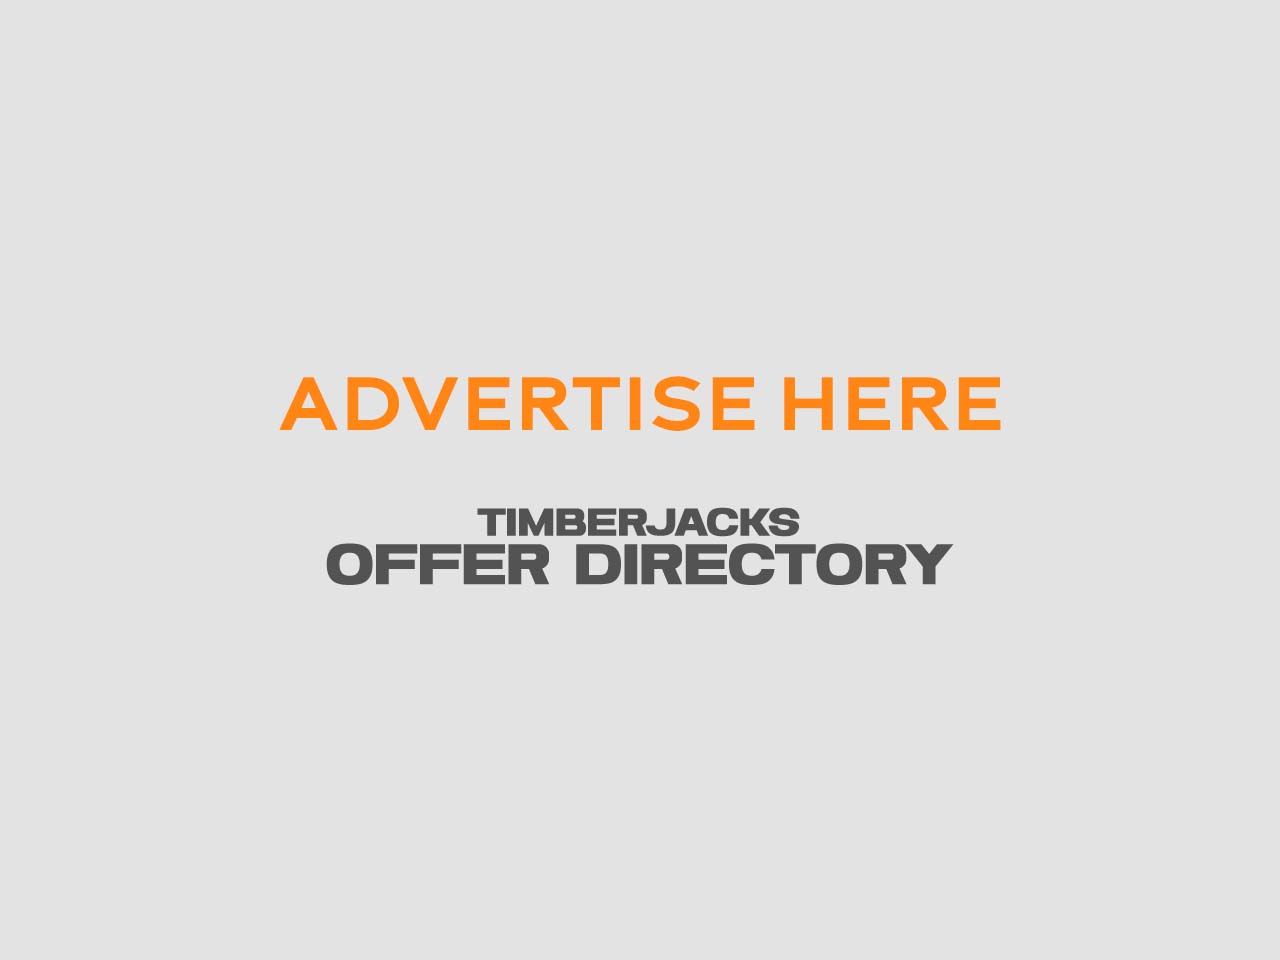 tj-offer-ad-here